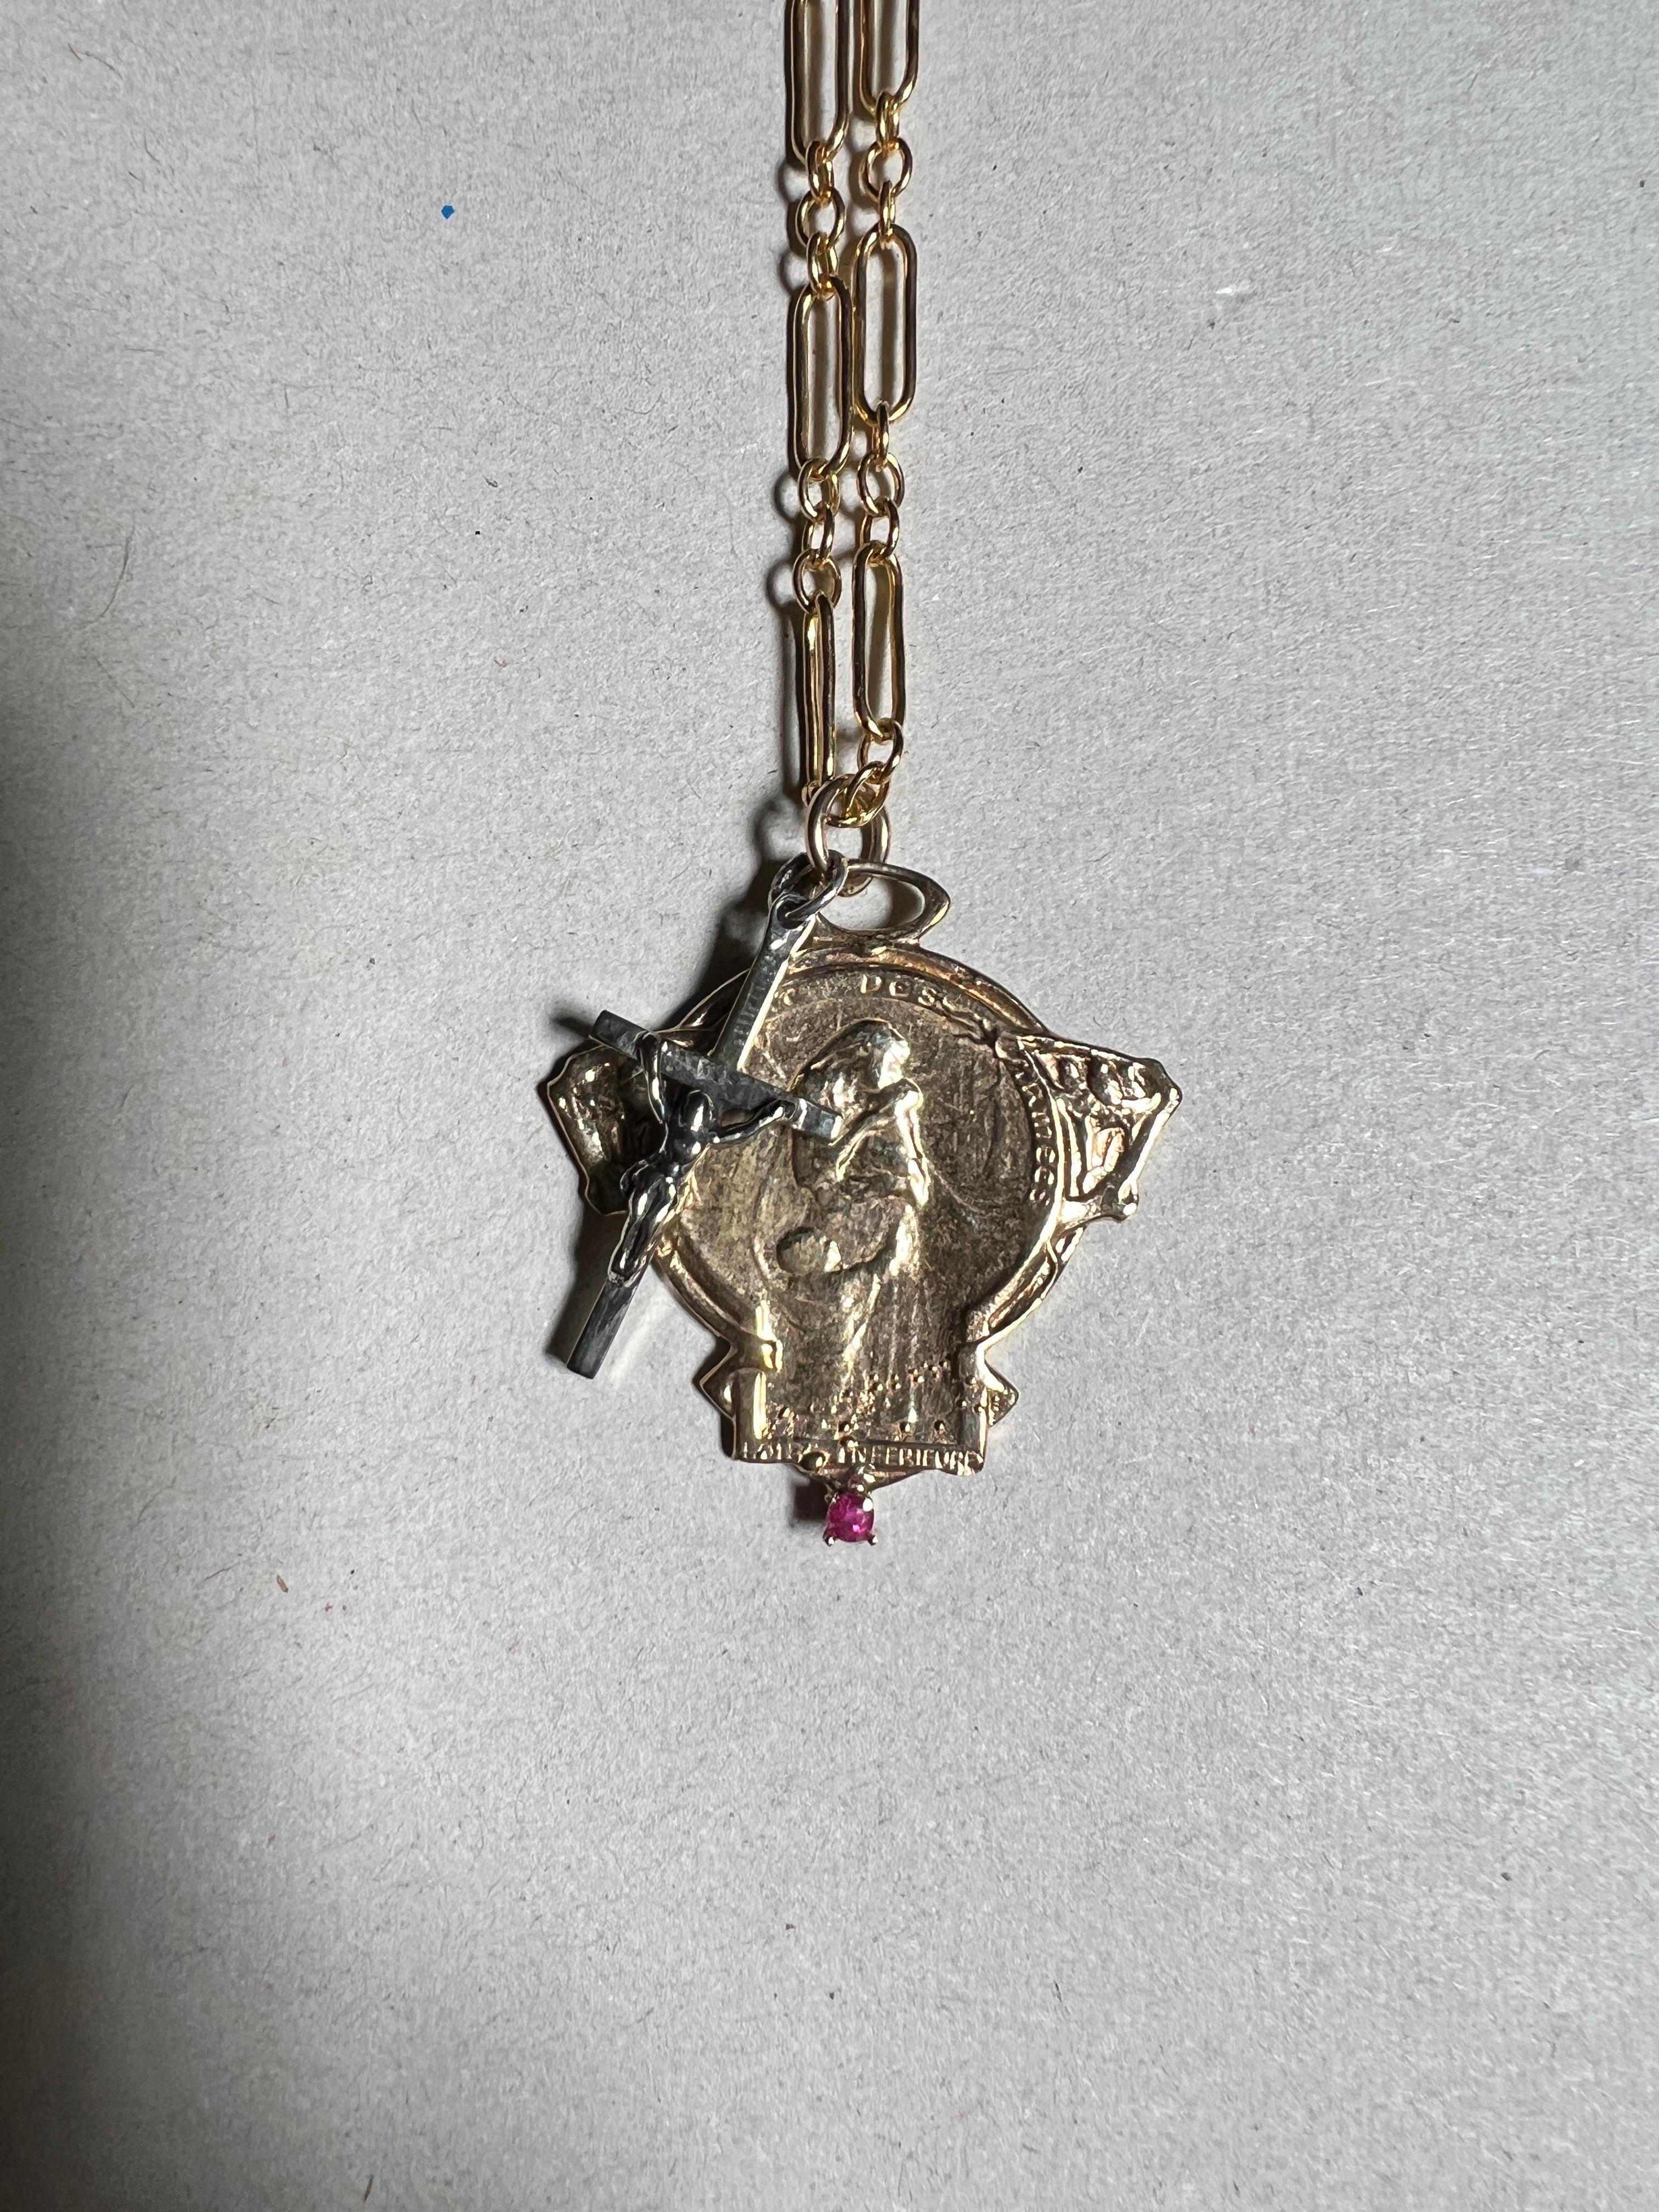 Brilliant Cut Art Nouveau French Medal Ruby Chain Necklace Silver Cross J Dauphin For Sale